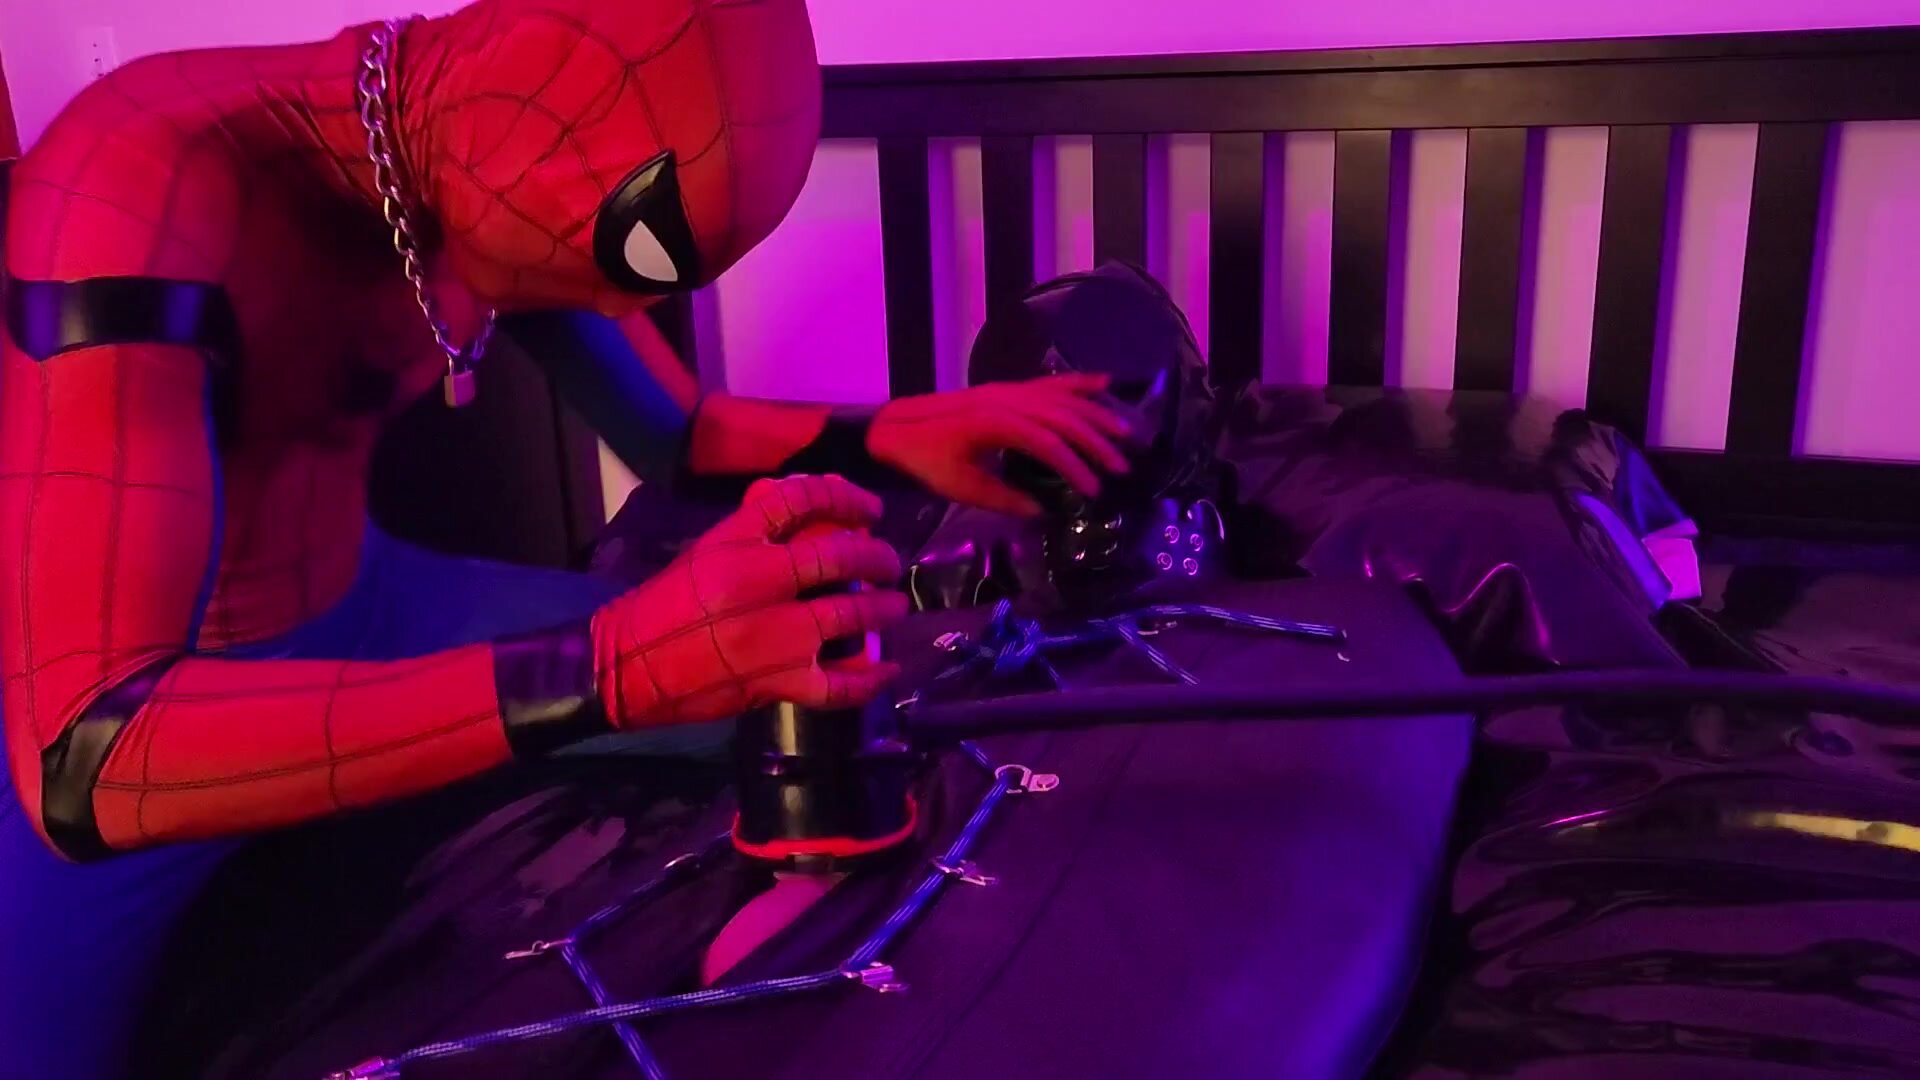 Spiderman and the Leather Gimp